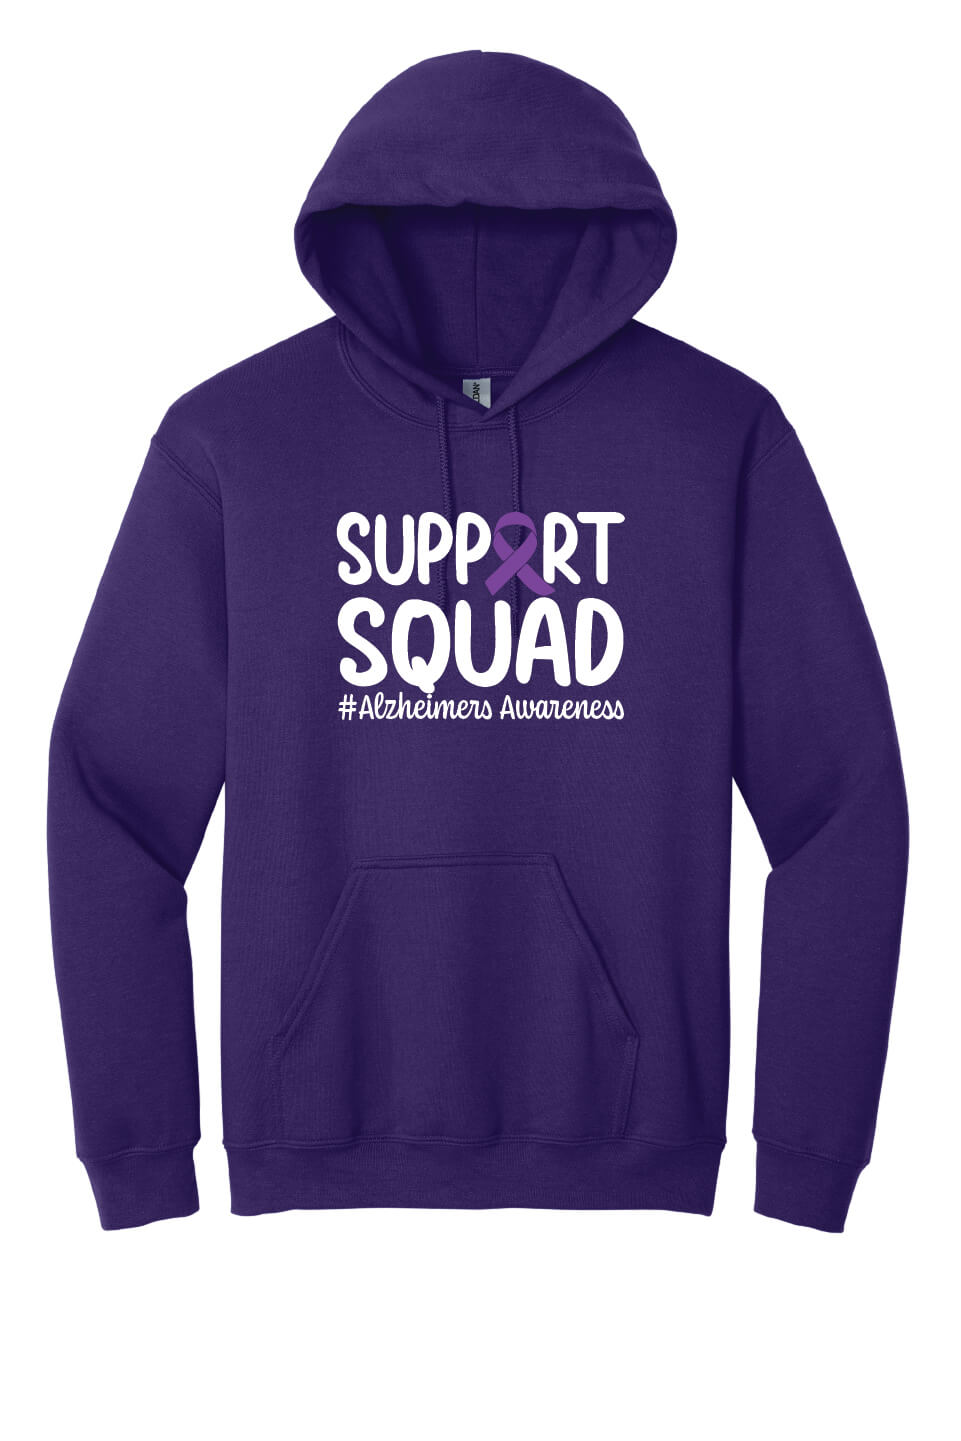 Support Squad Hoodie purple